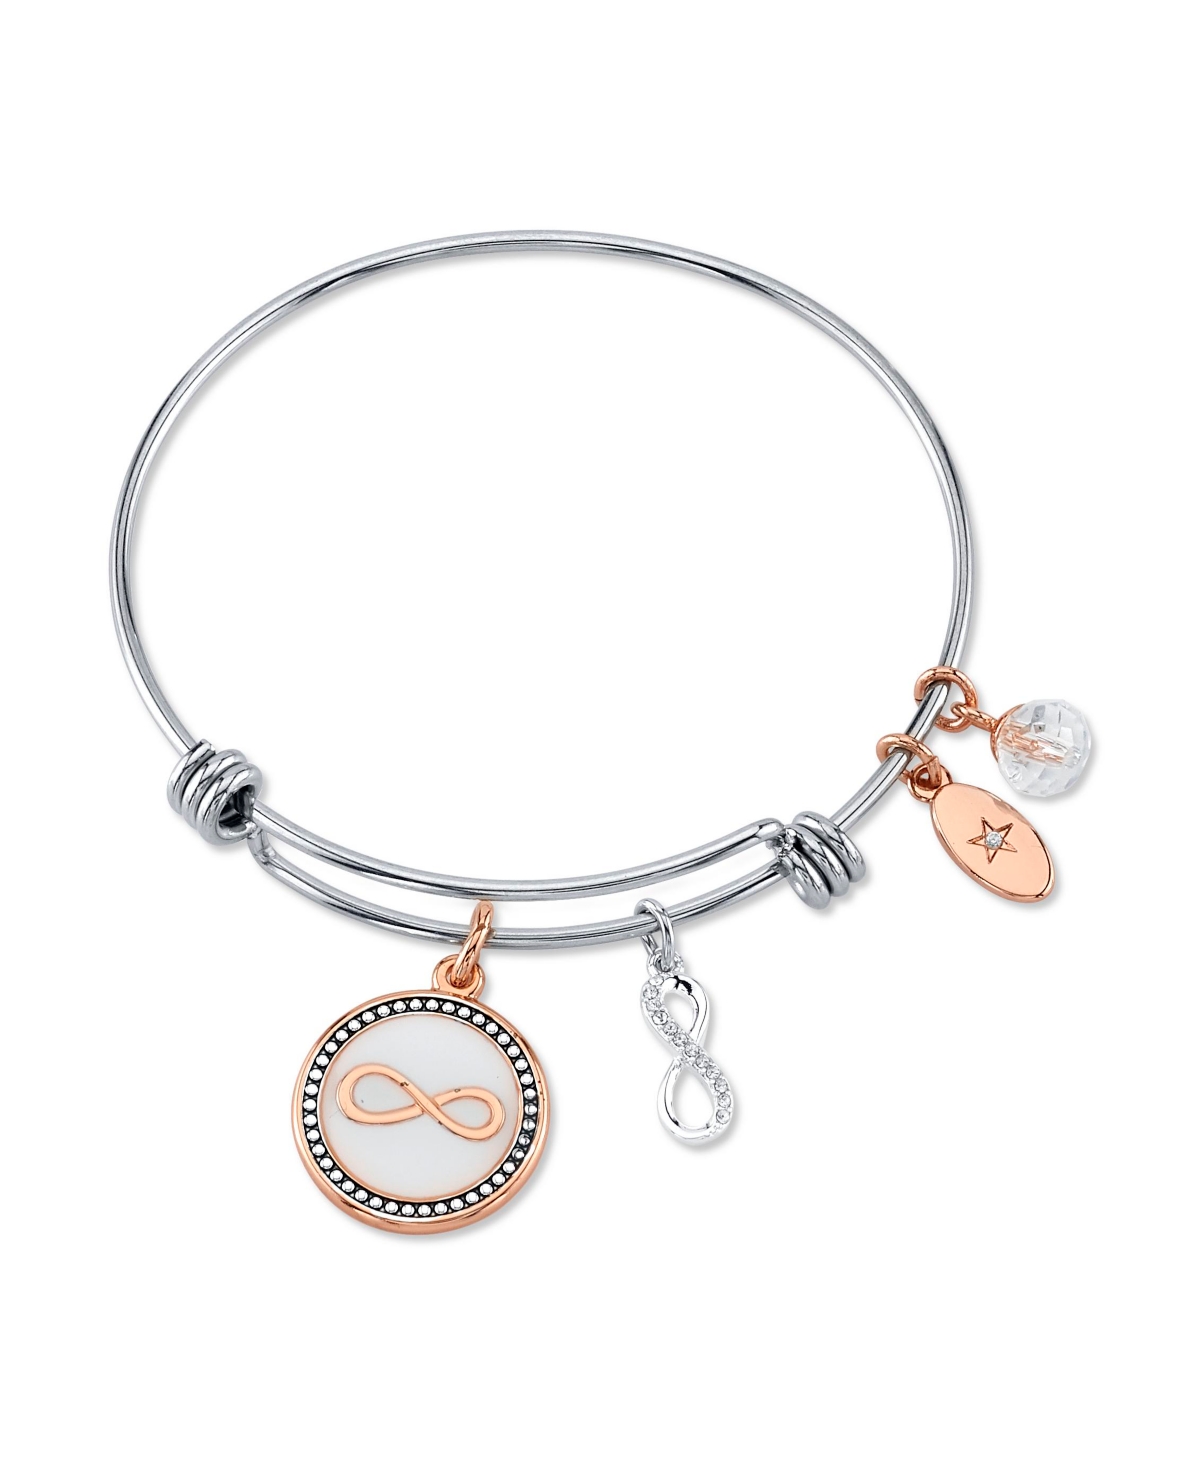 "Forever Friends" Infinity Bangle Bracelet in Stainless Steel & Rose Gold-Tone with Silver Plated Charms - Silver